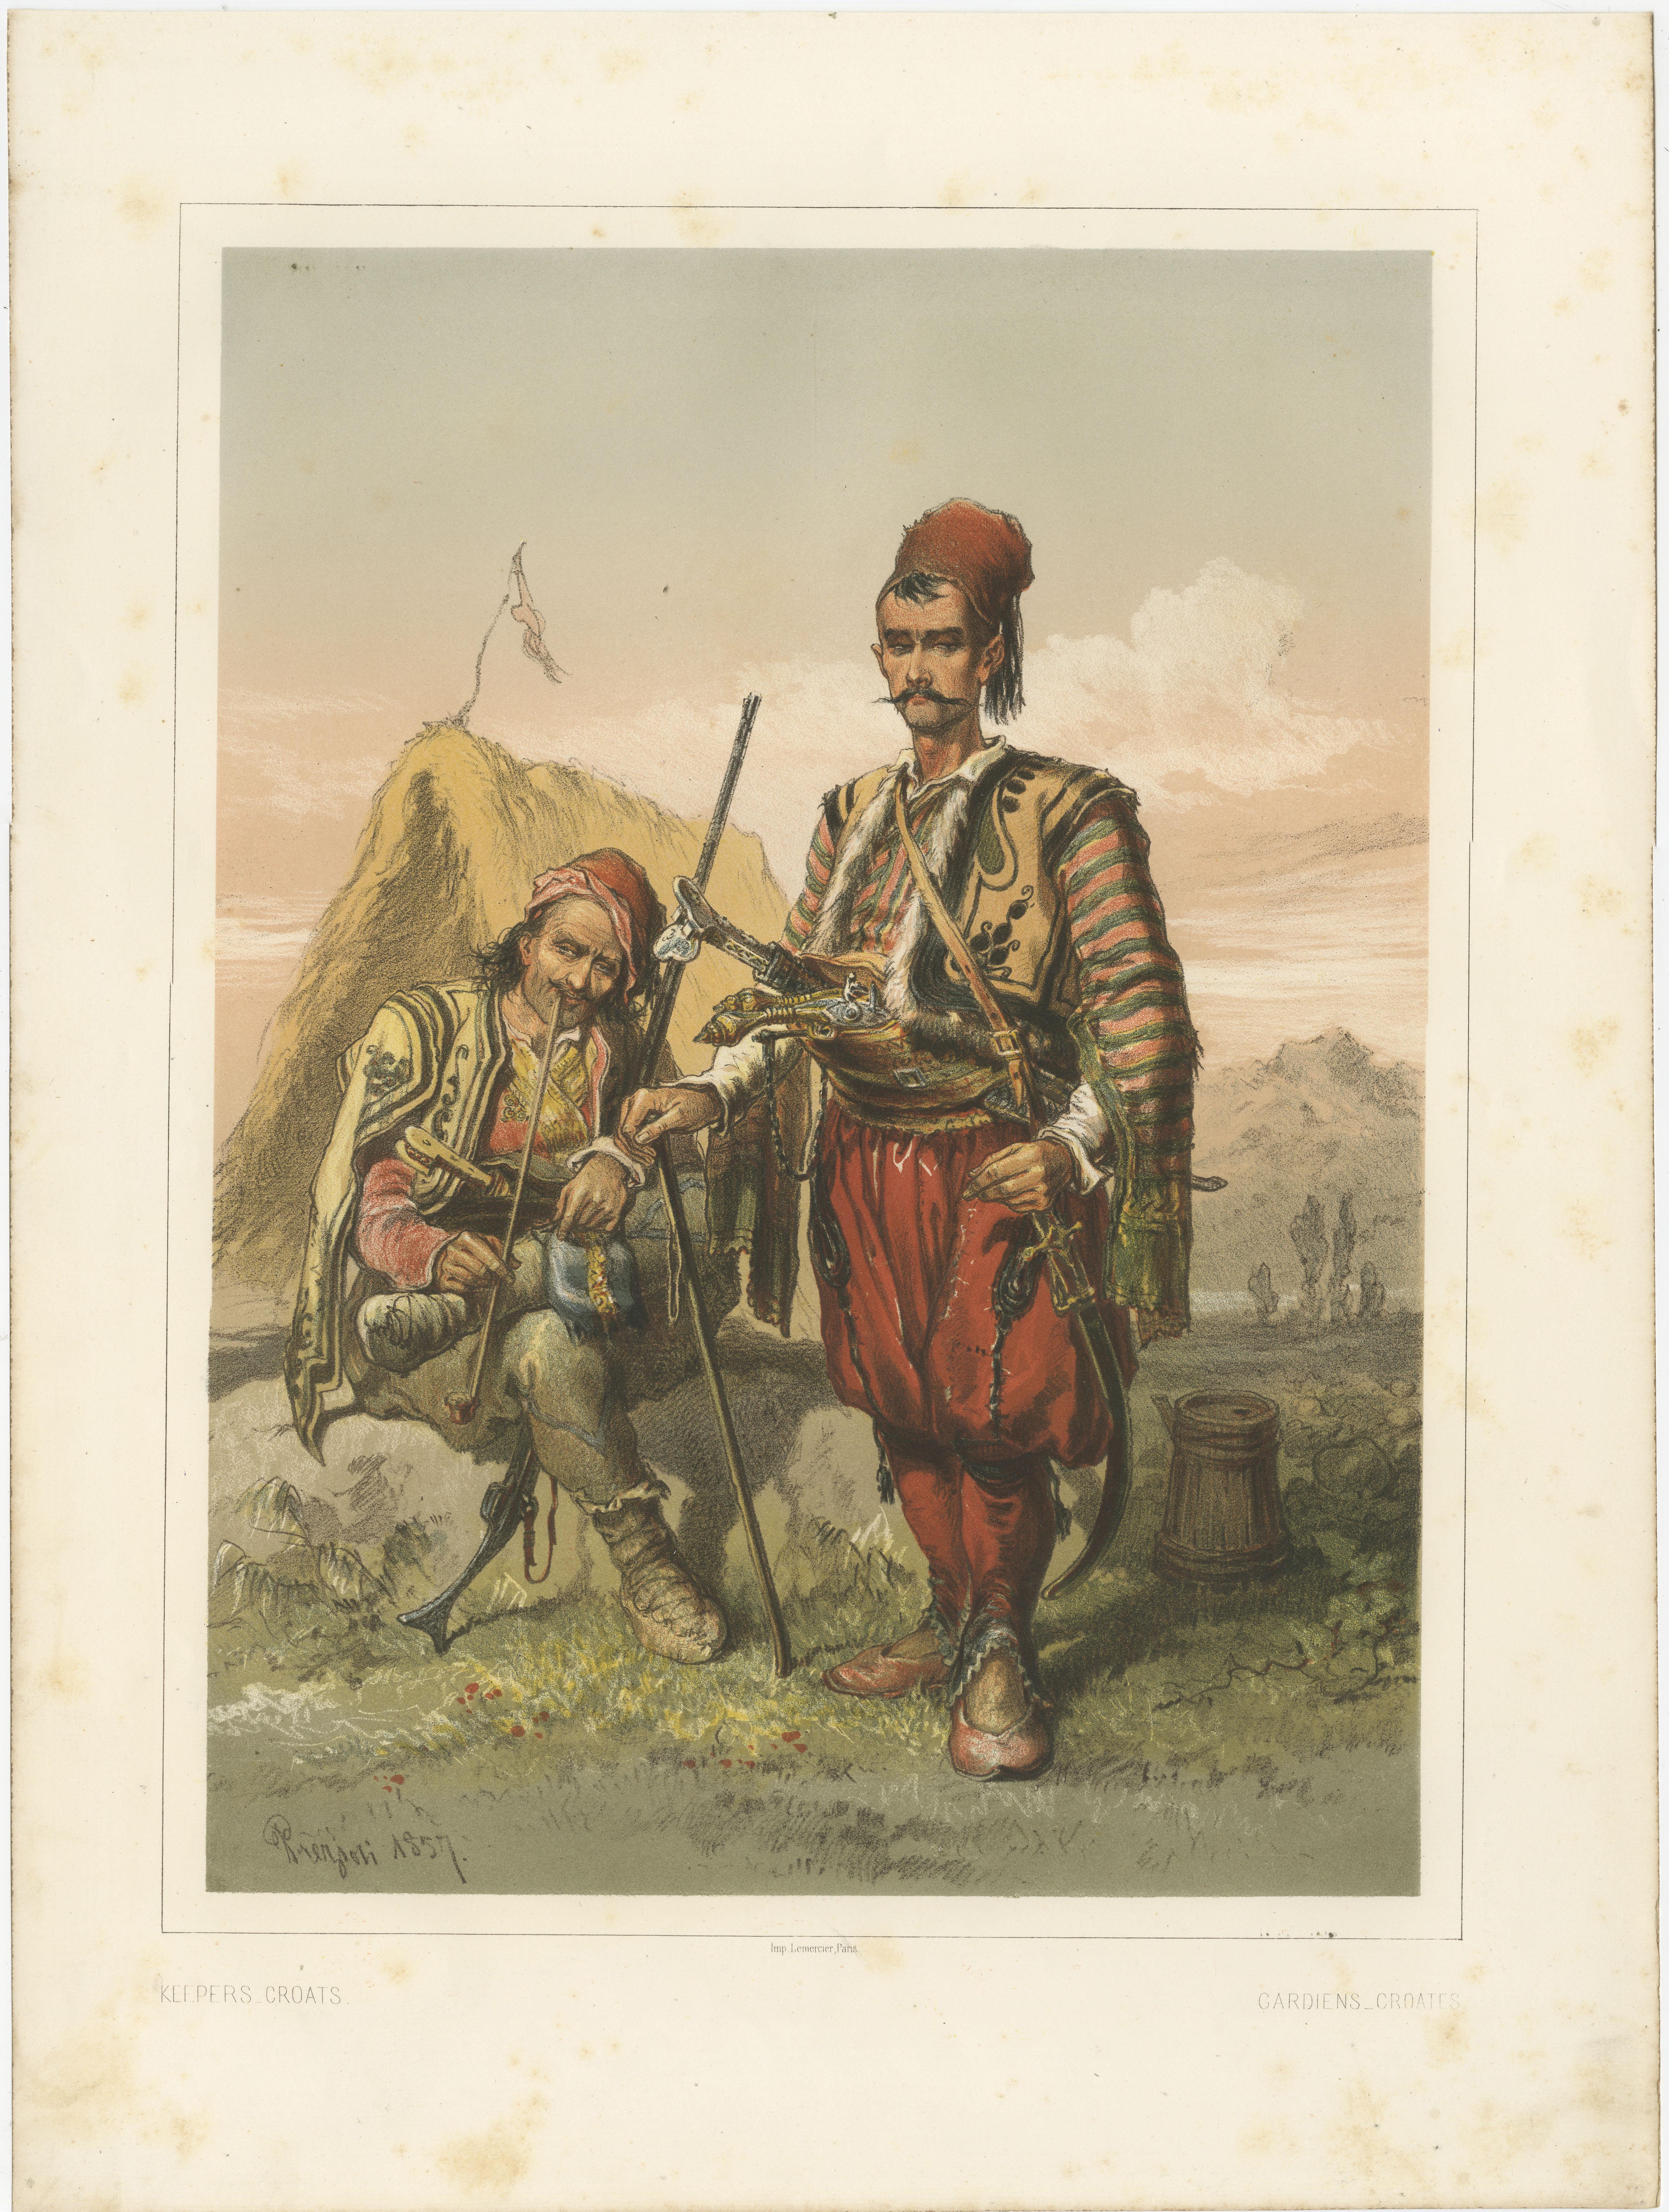 Antique print titled 'Keepers Croats - Gardiens Croates'. Chromolithographed plate of Croatian guards. This print originates from 'Stamboul. Souvenir d'Orient' by Amadeo Preziosi. Published circa 1860.